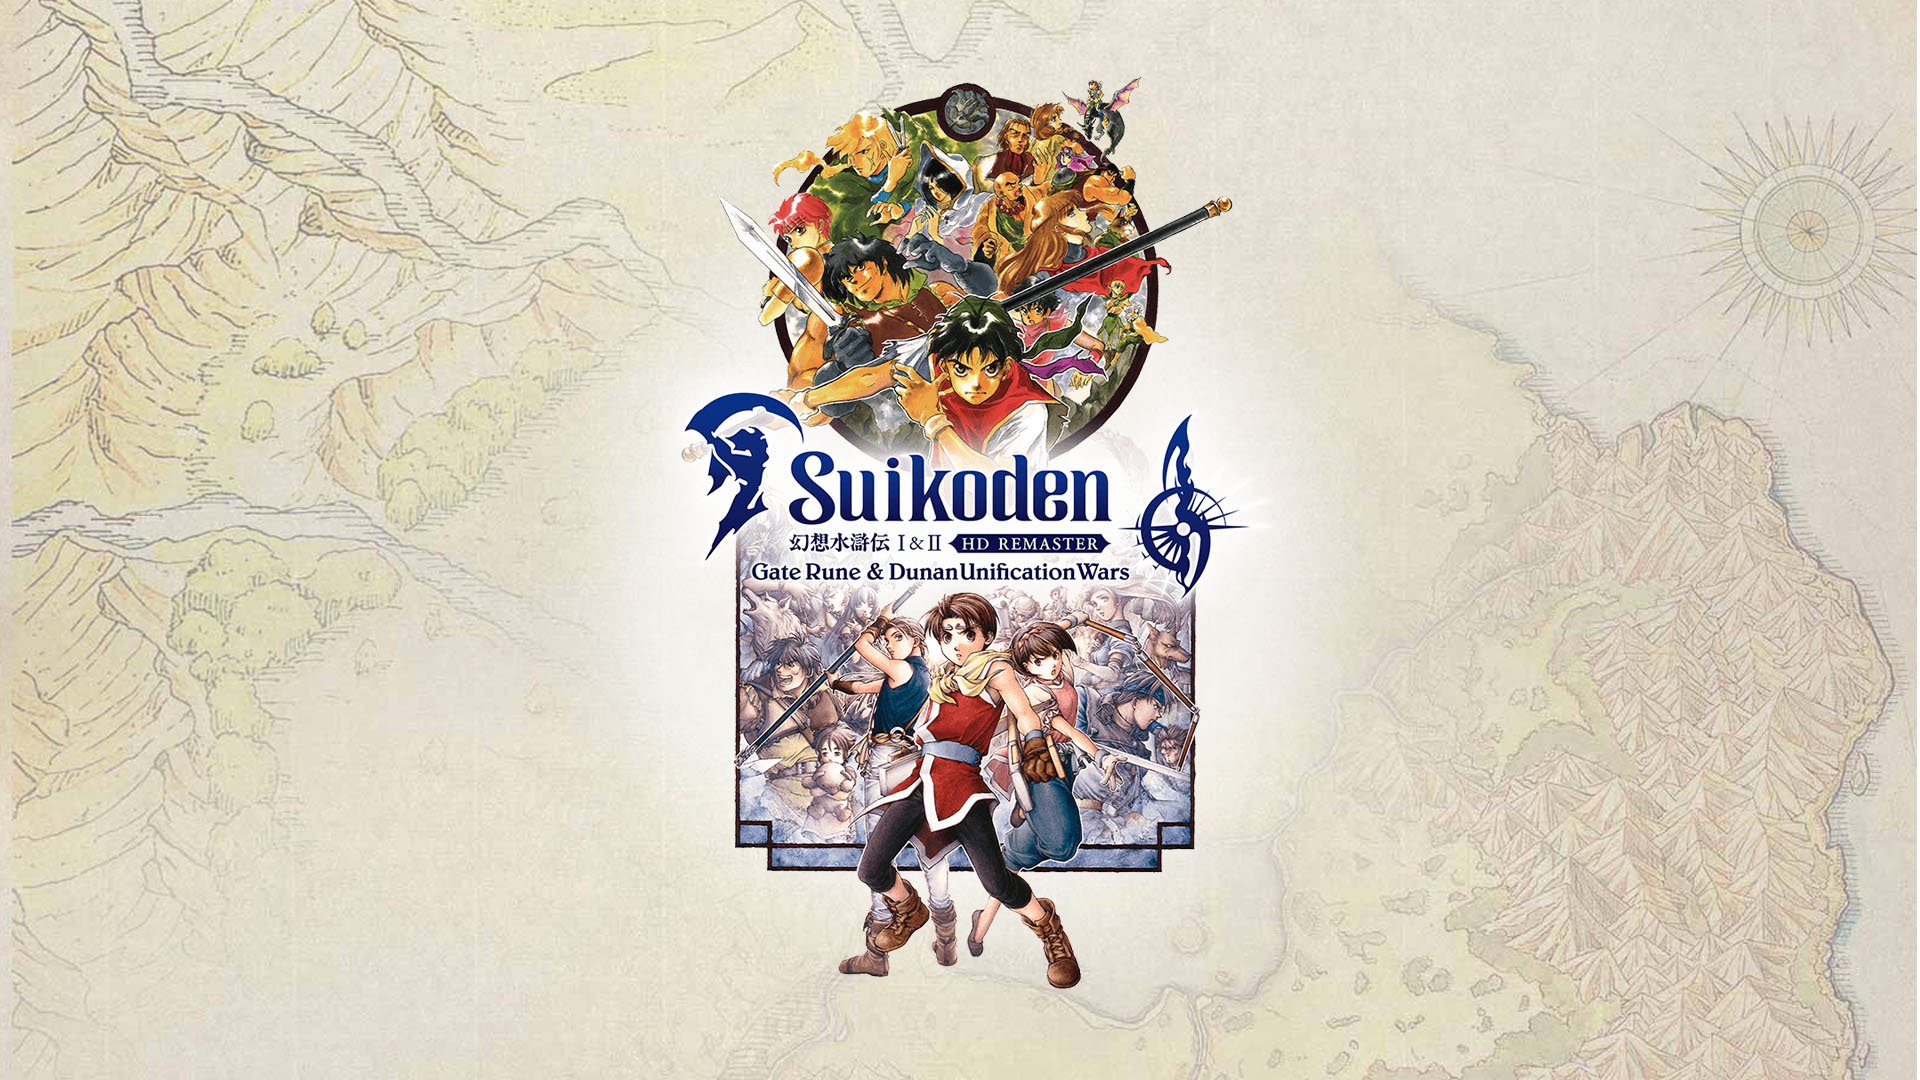 Suikoden 1 and 2 HD Remaster announced